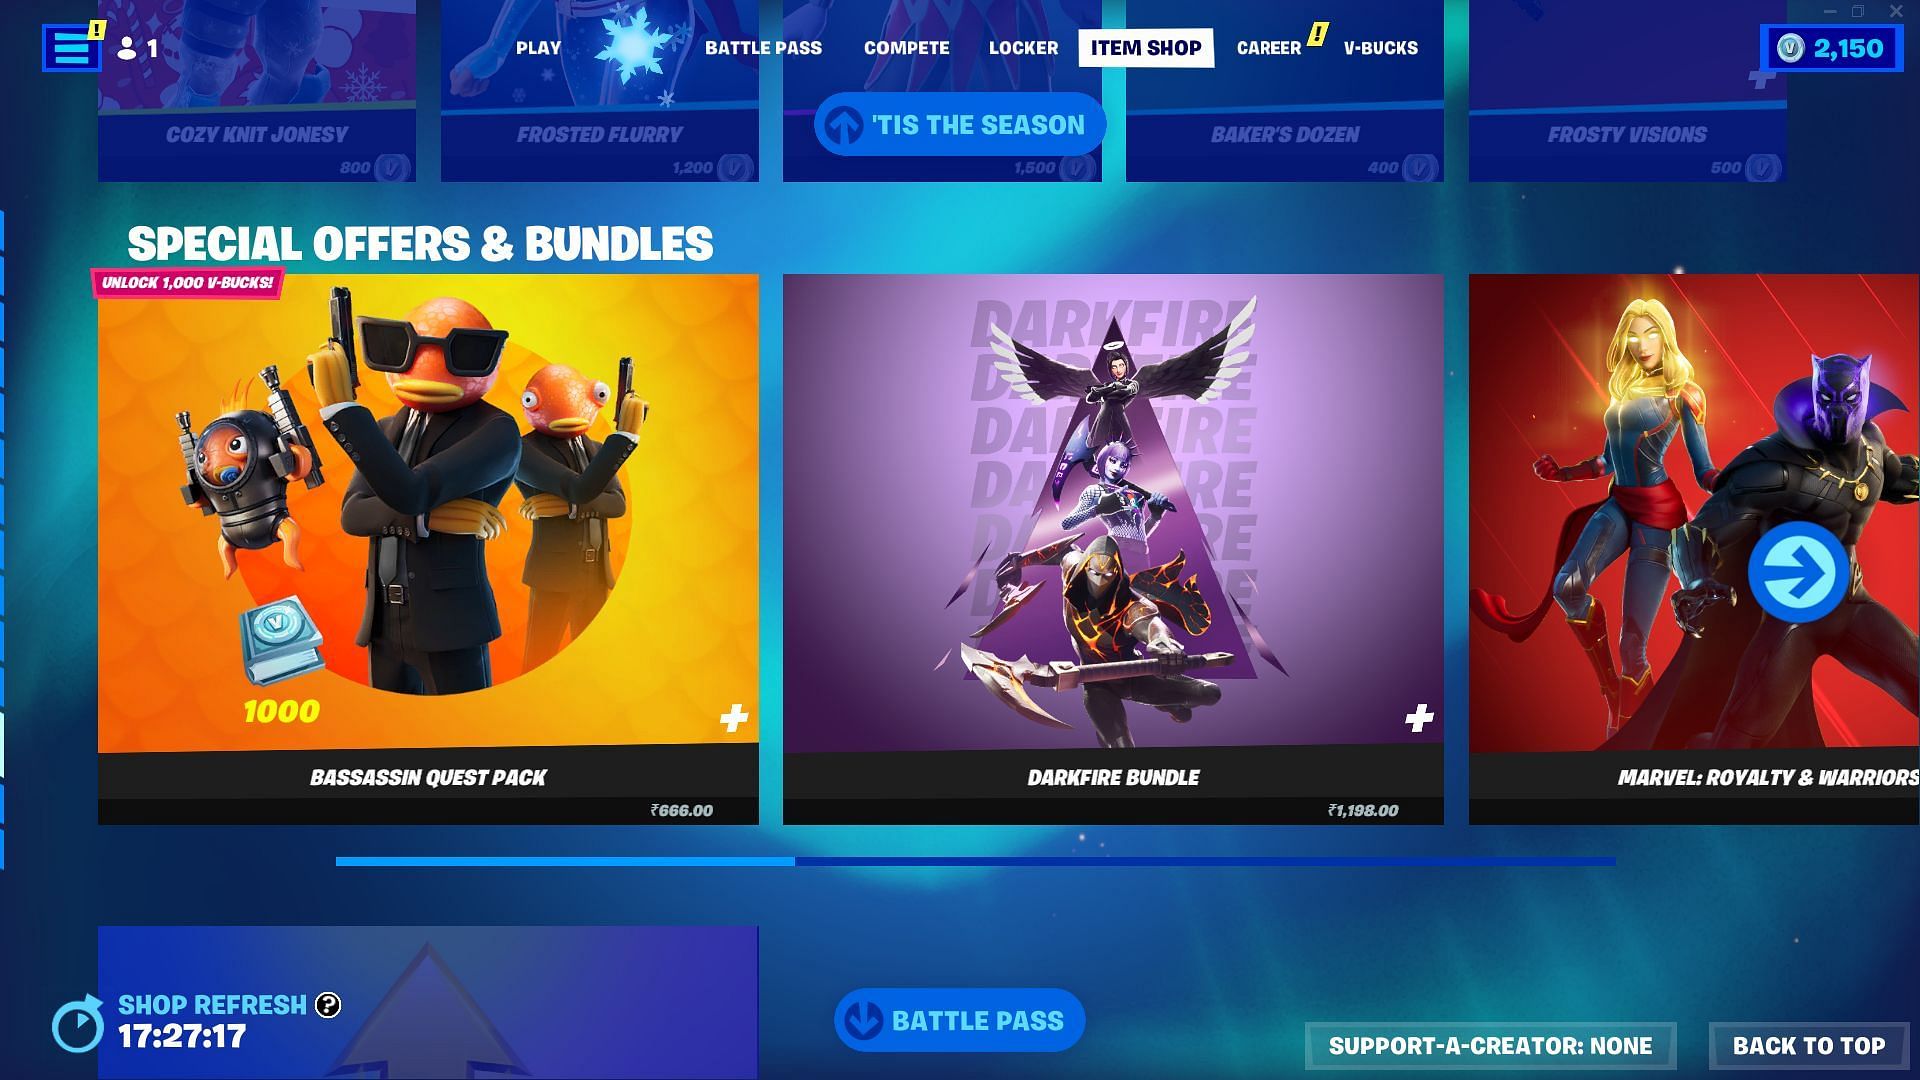 The Guff Gringle skin will be located in this tab (Image via Epic Games)